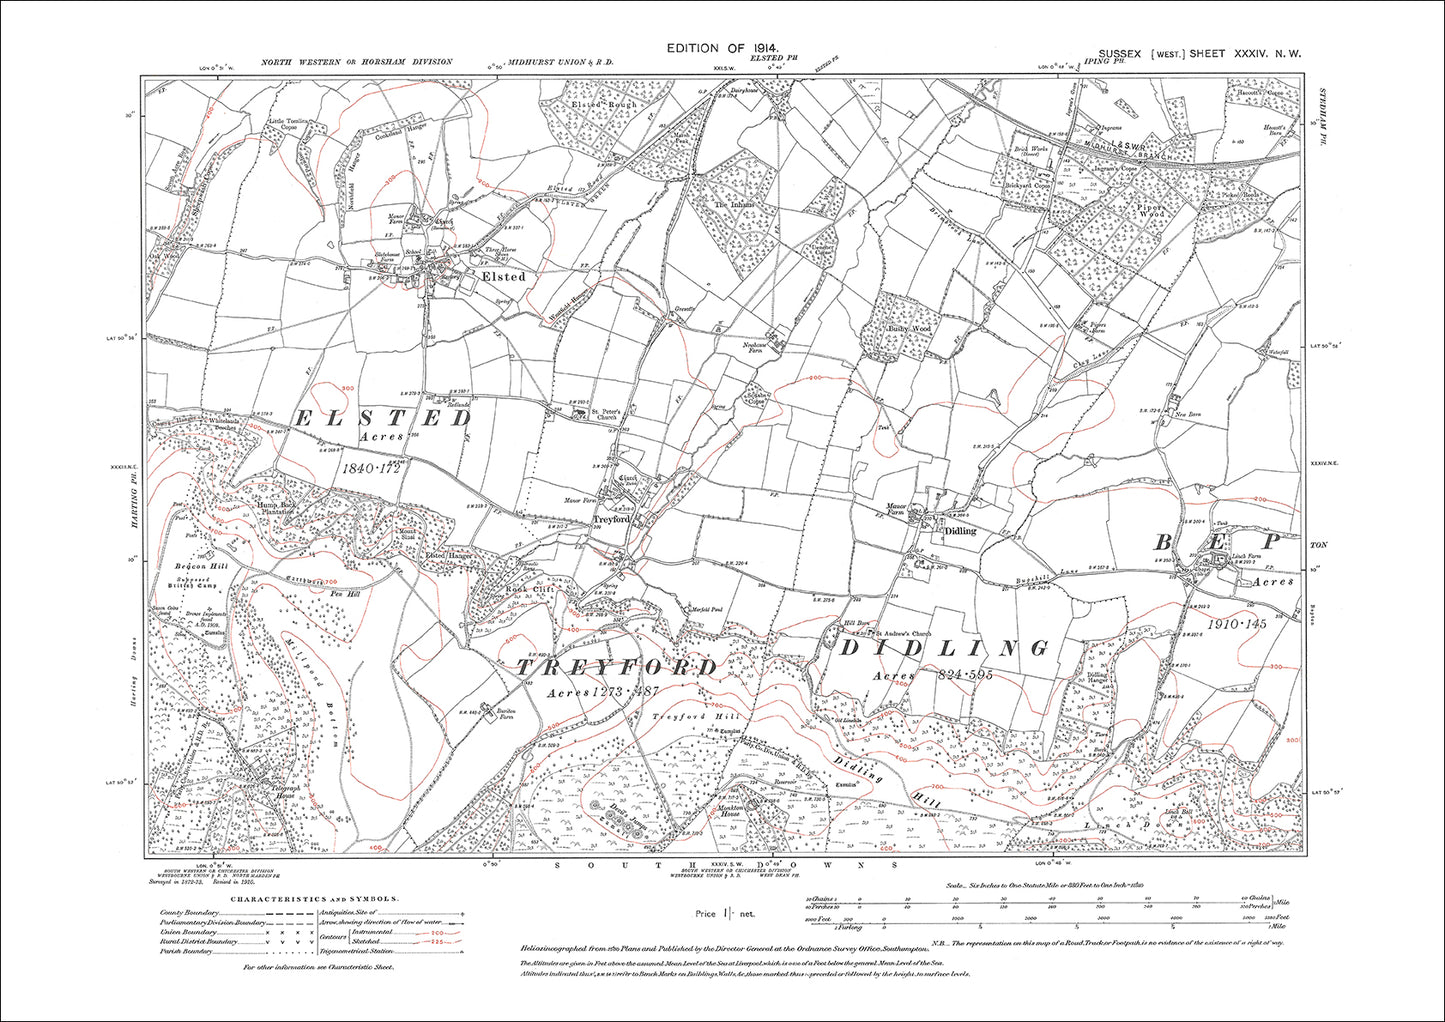 Elsted, Treyford, Didling, old map Sussex 1914: 34NW